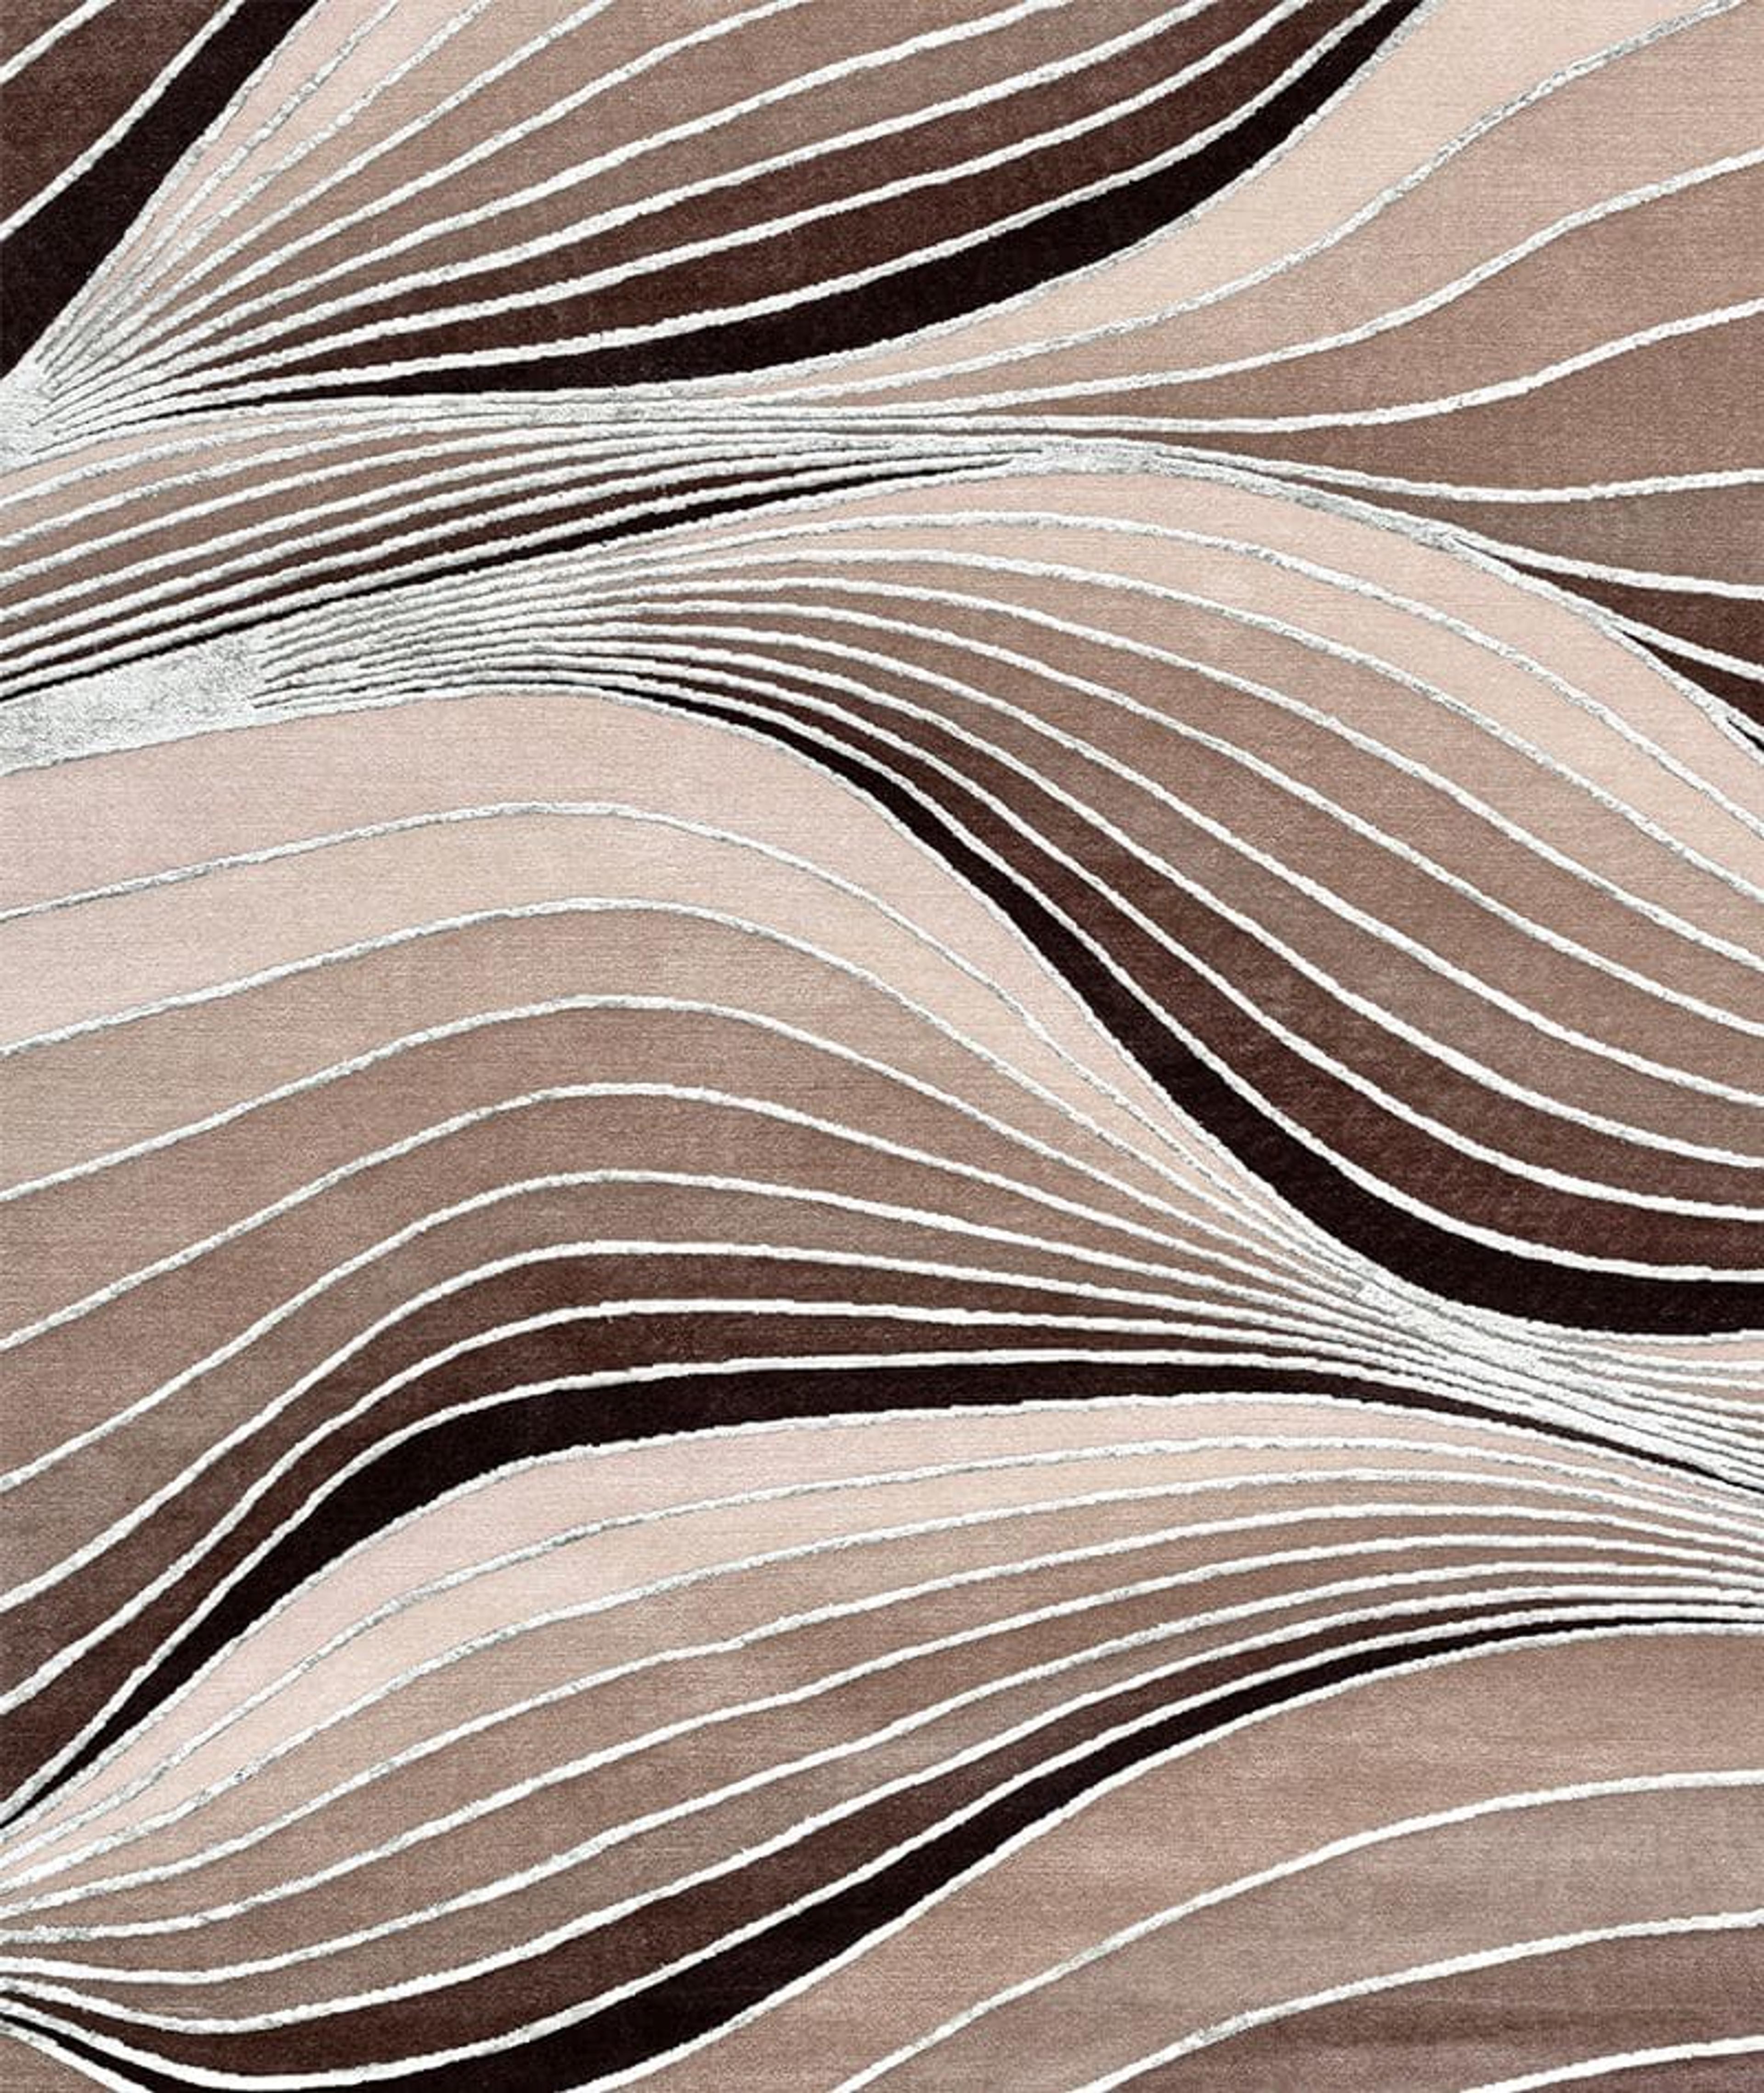 A macro detail of the Distorsion Rug's sinuous design by Studio Marco Piva